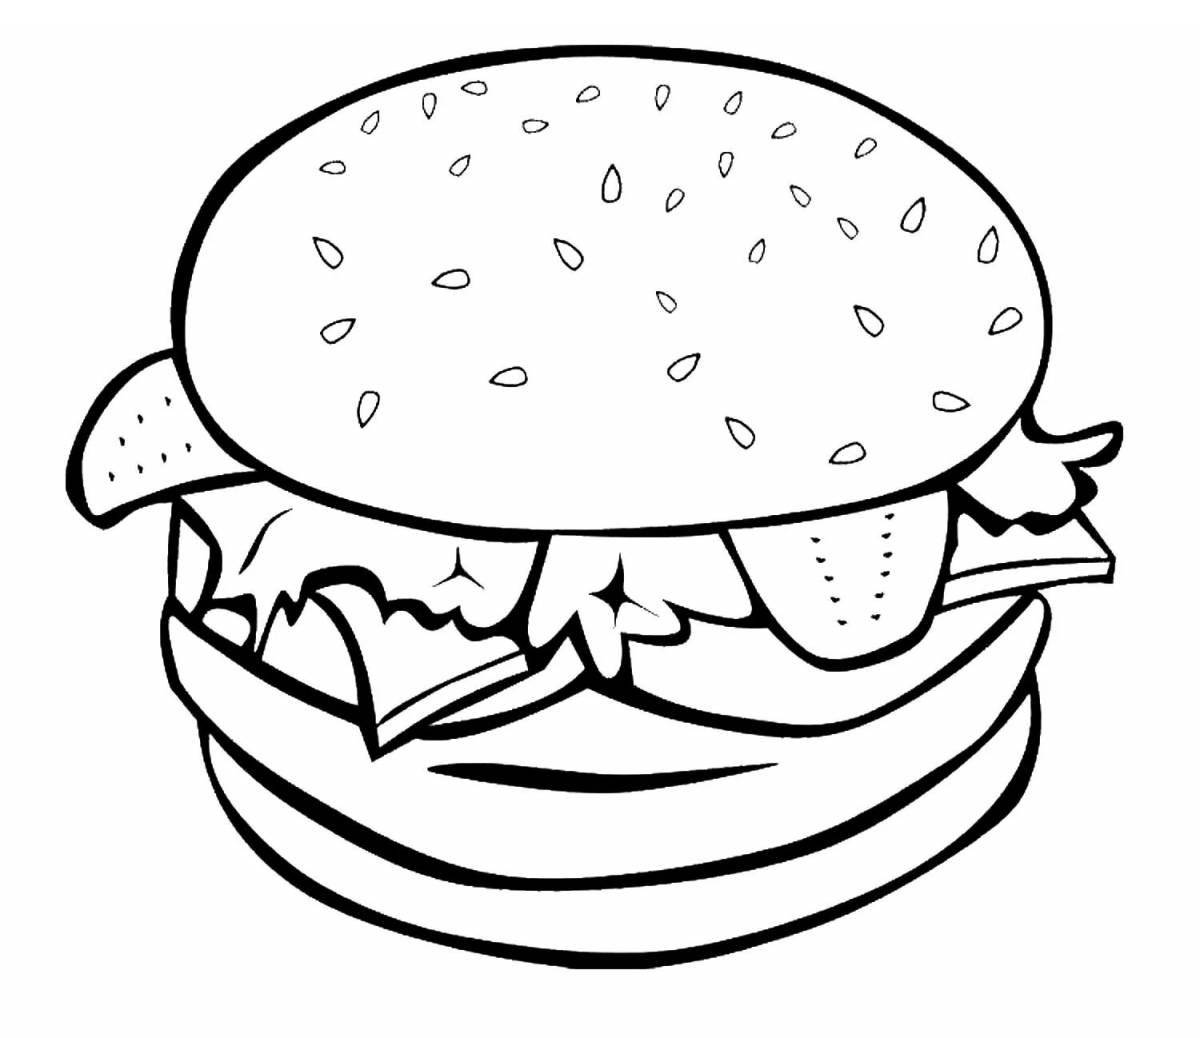 Sweet tasty and point coloring page